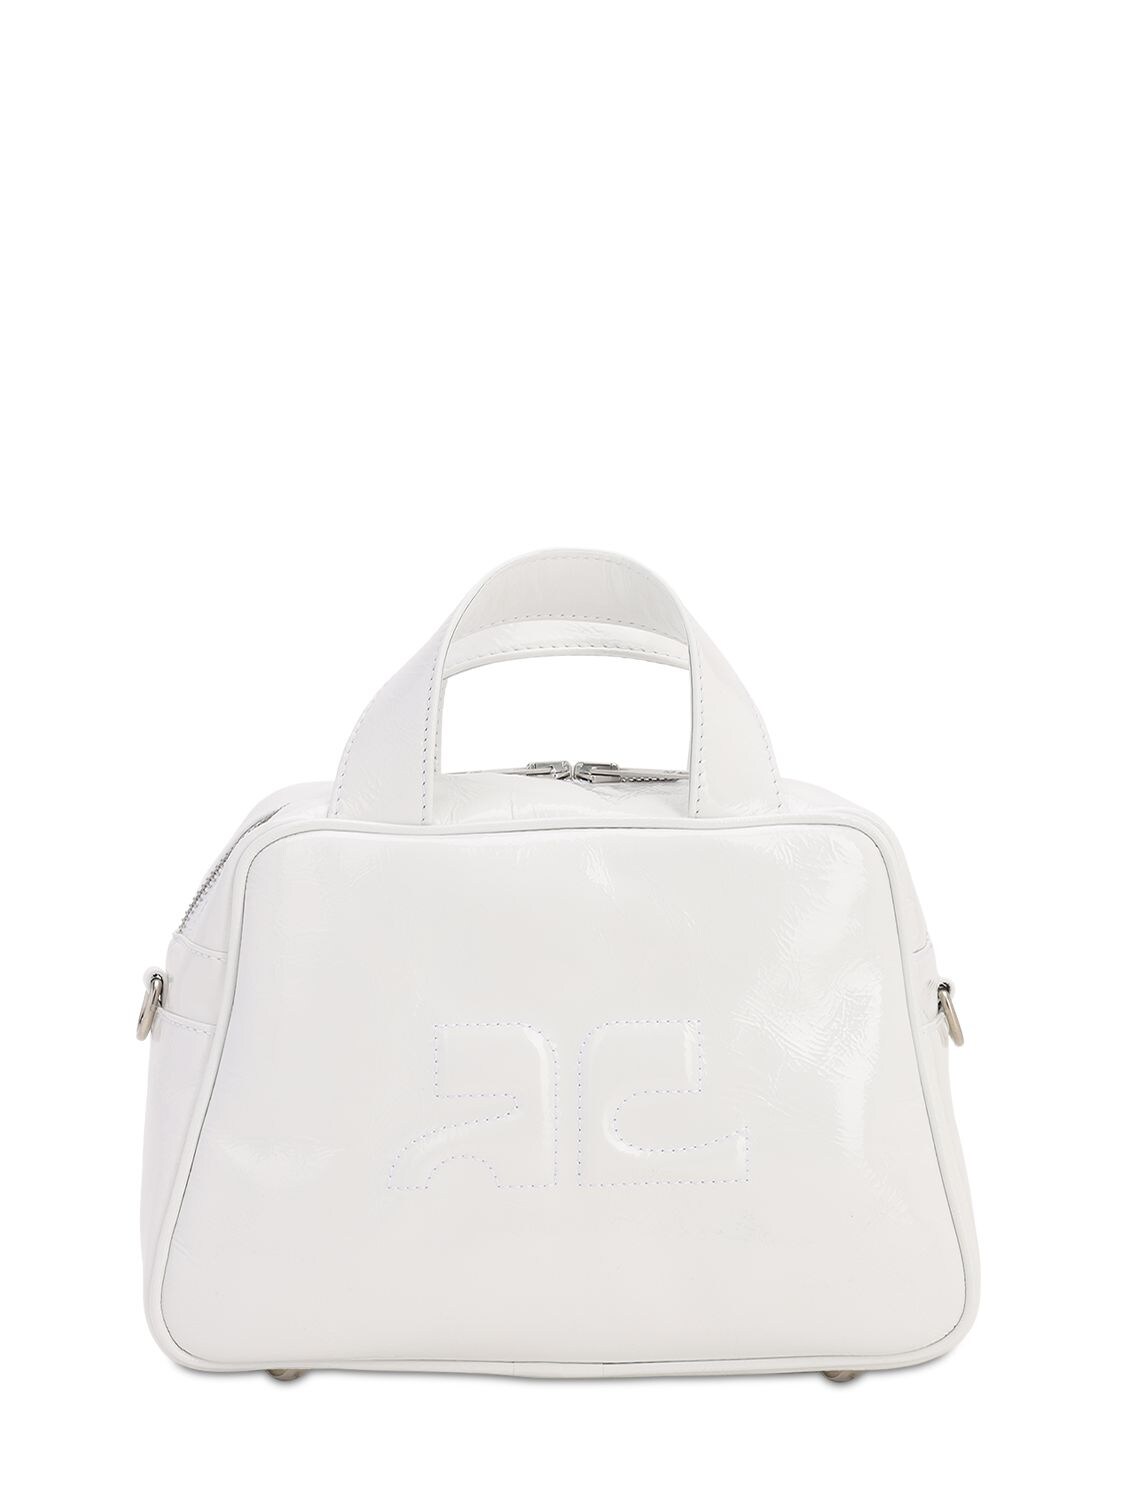 Courrèges Pineapple Top Handle Bag In White